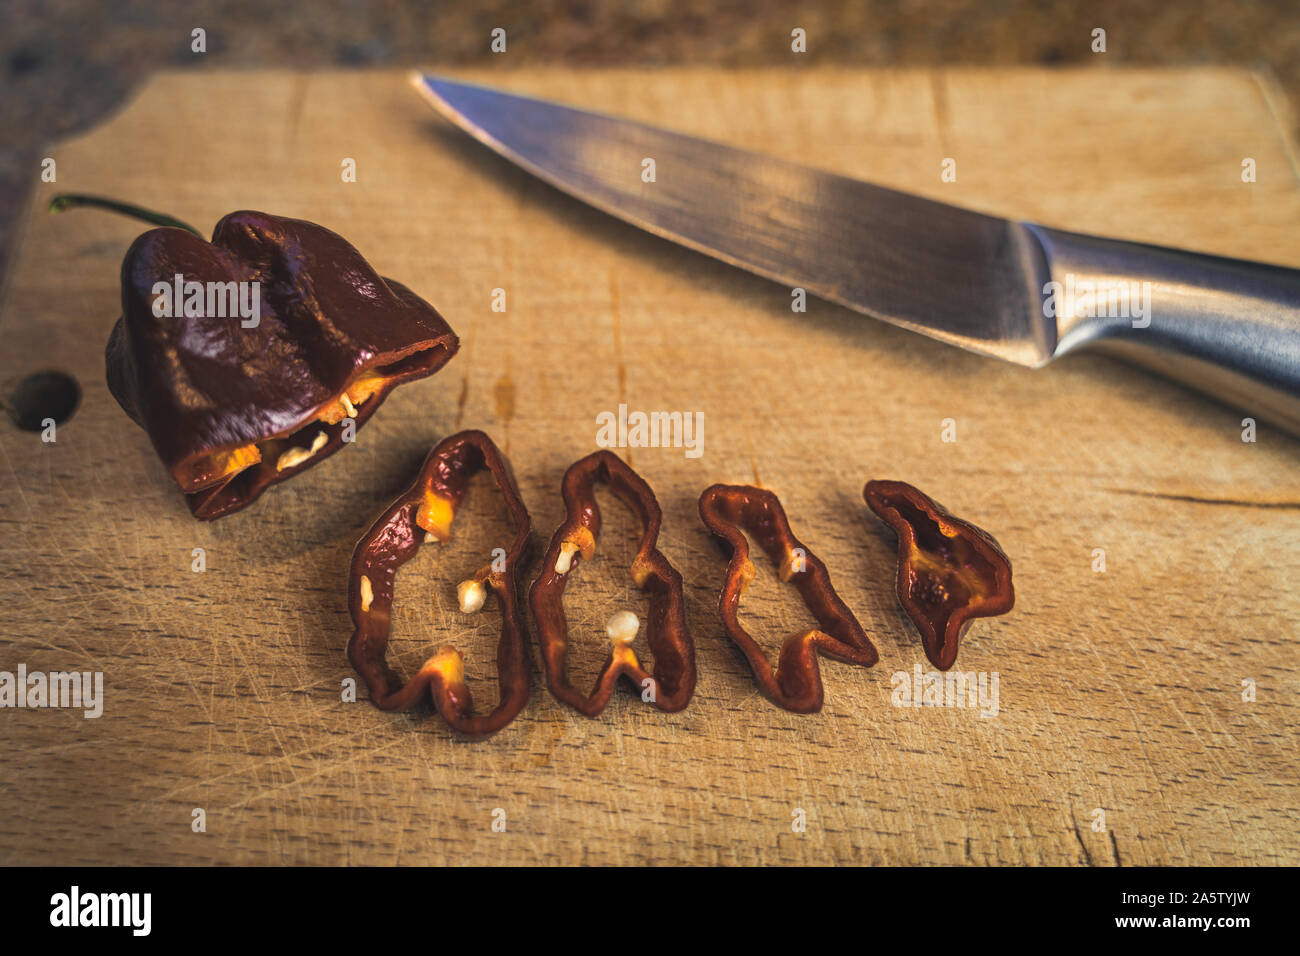 Chocolate Habanero pepper (Capsicum chinense) slices on a wood cutting board and a chrome knife. Healthy and really hot chili peppers. Stock Photo